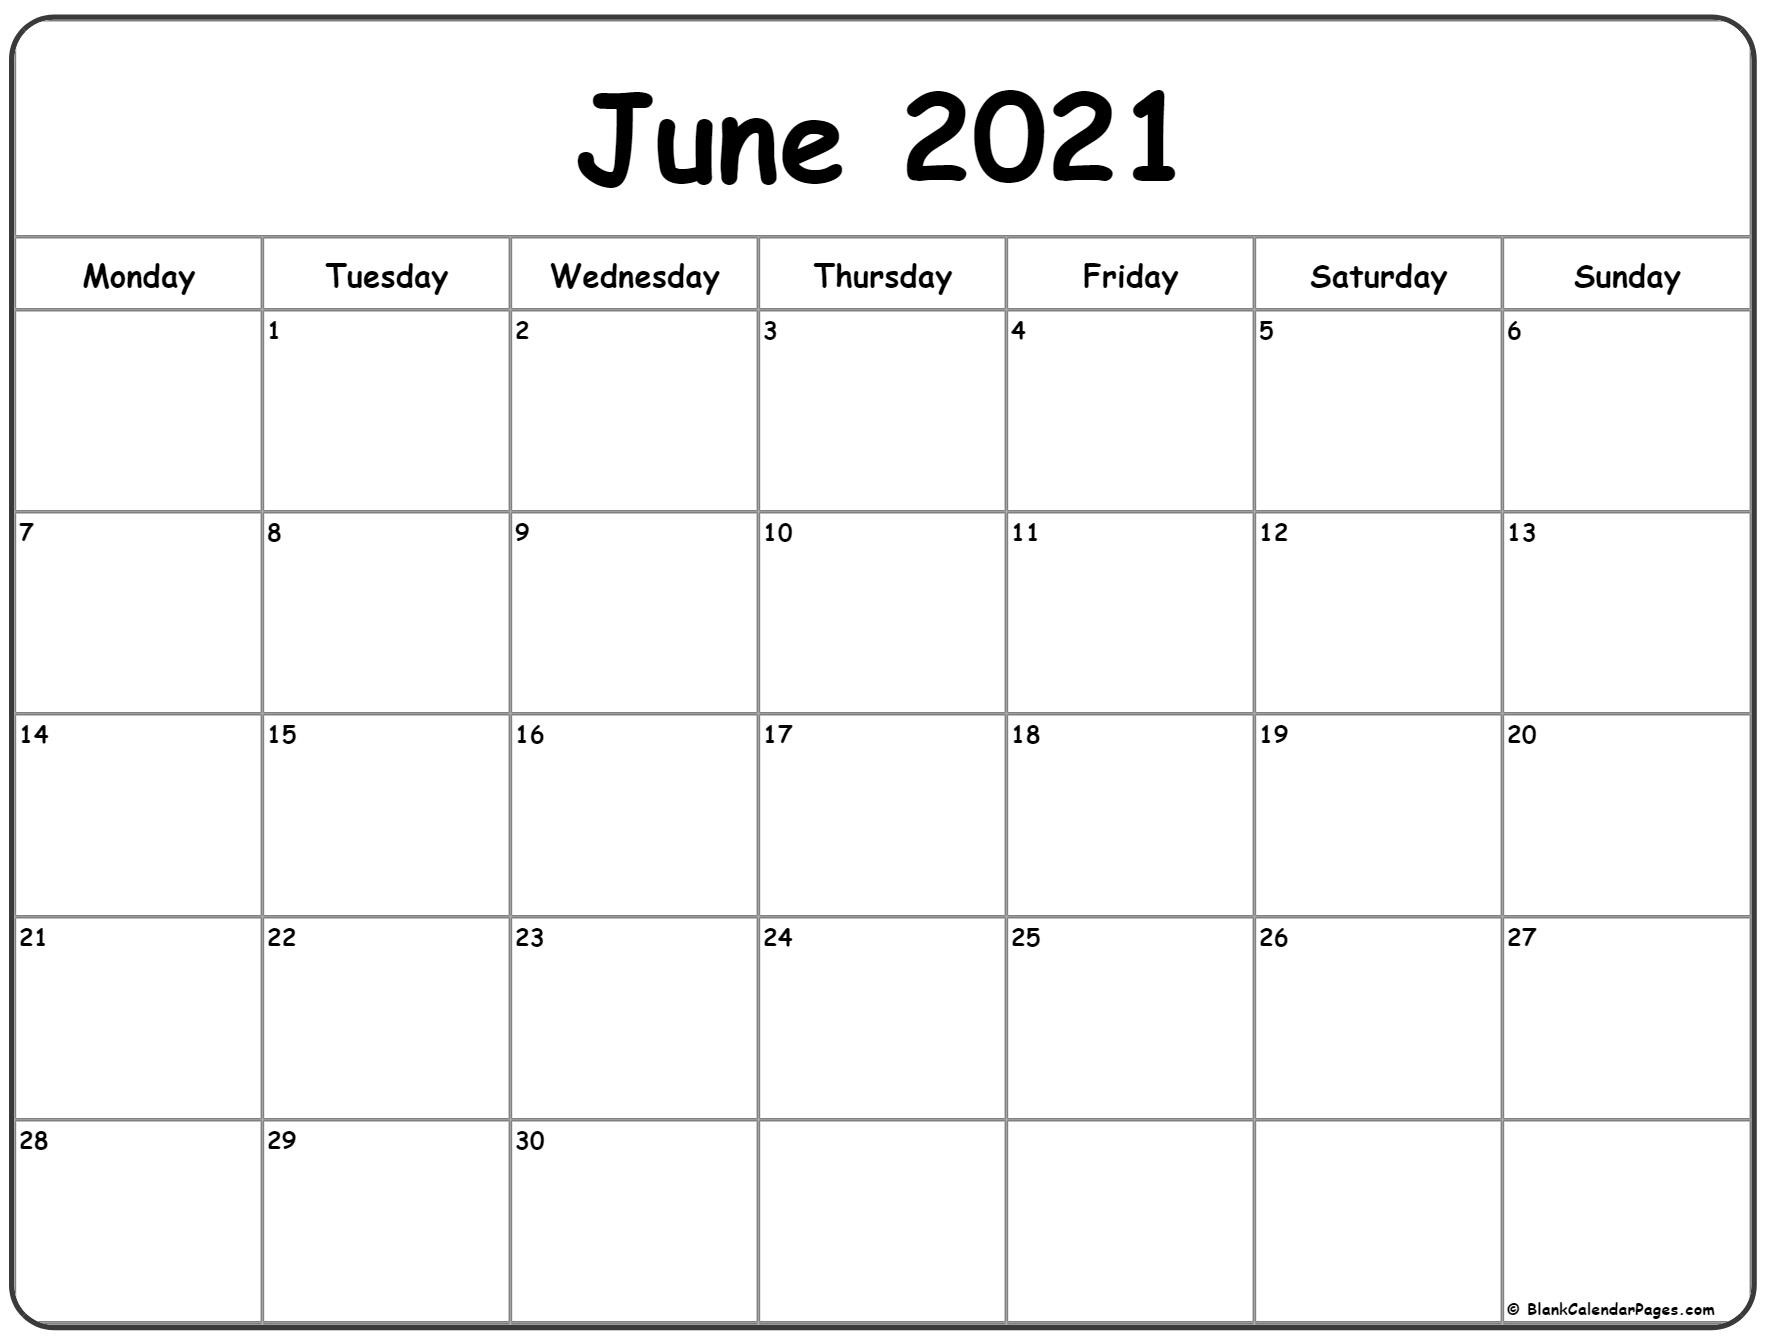 Jue Calendar 2021 | Printable March-Monthly Caldenar For May 2021 With Monday Thru Friday